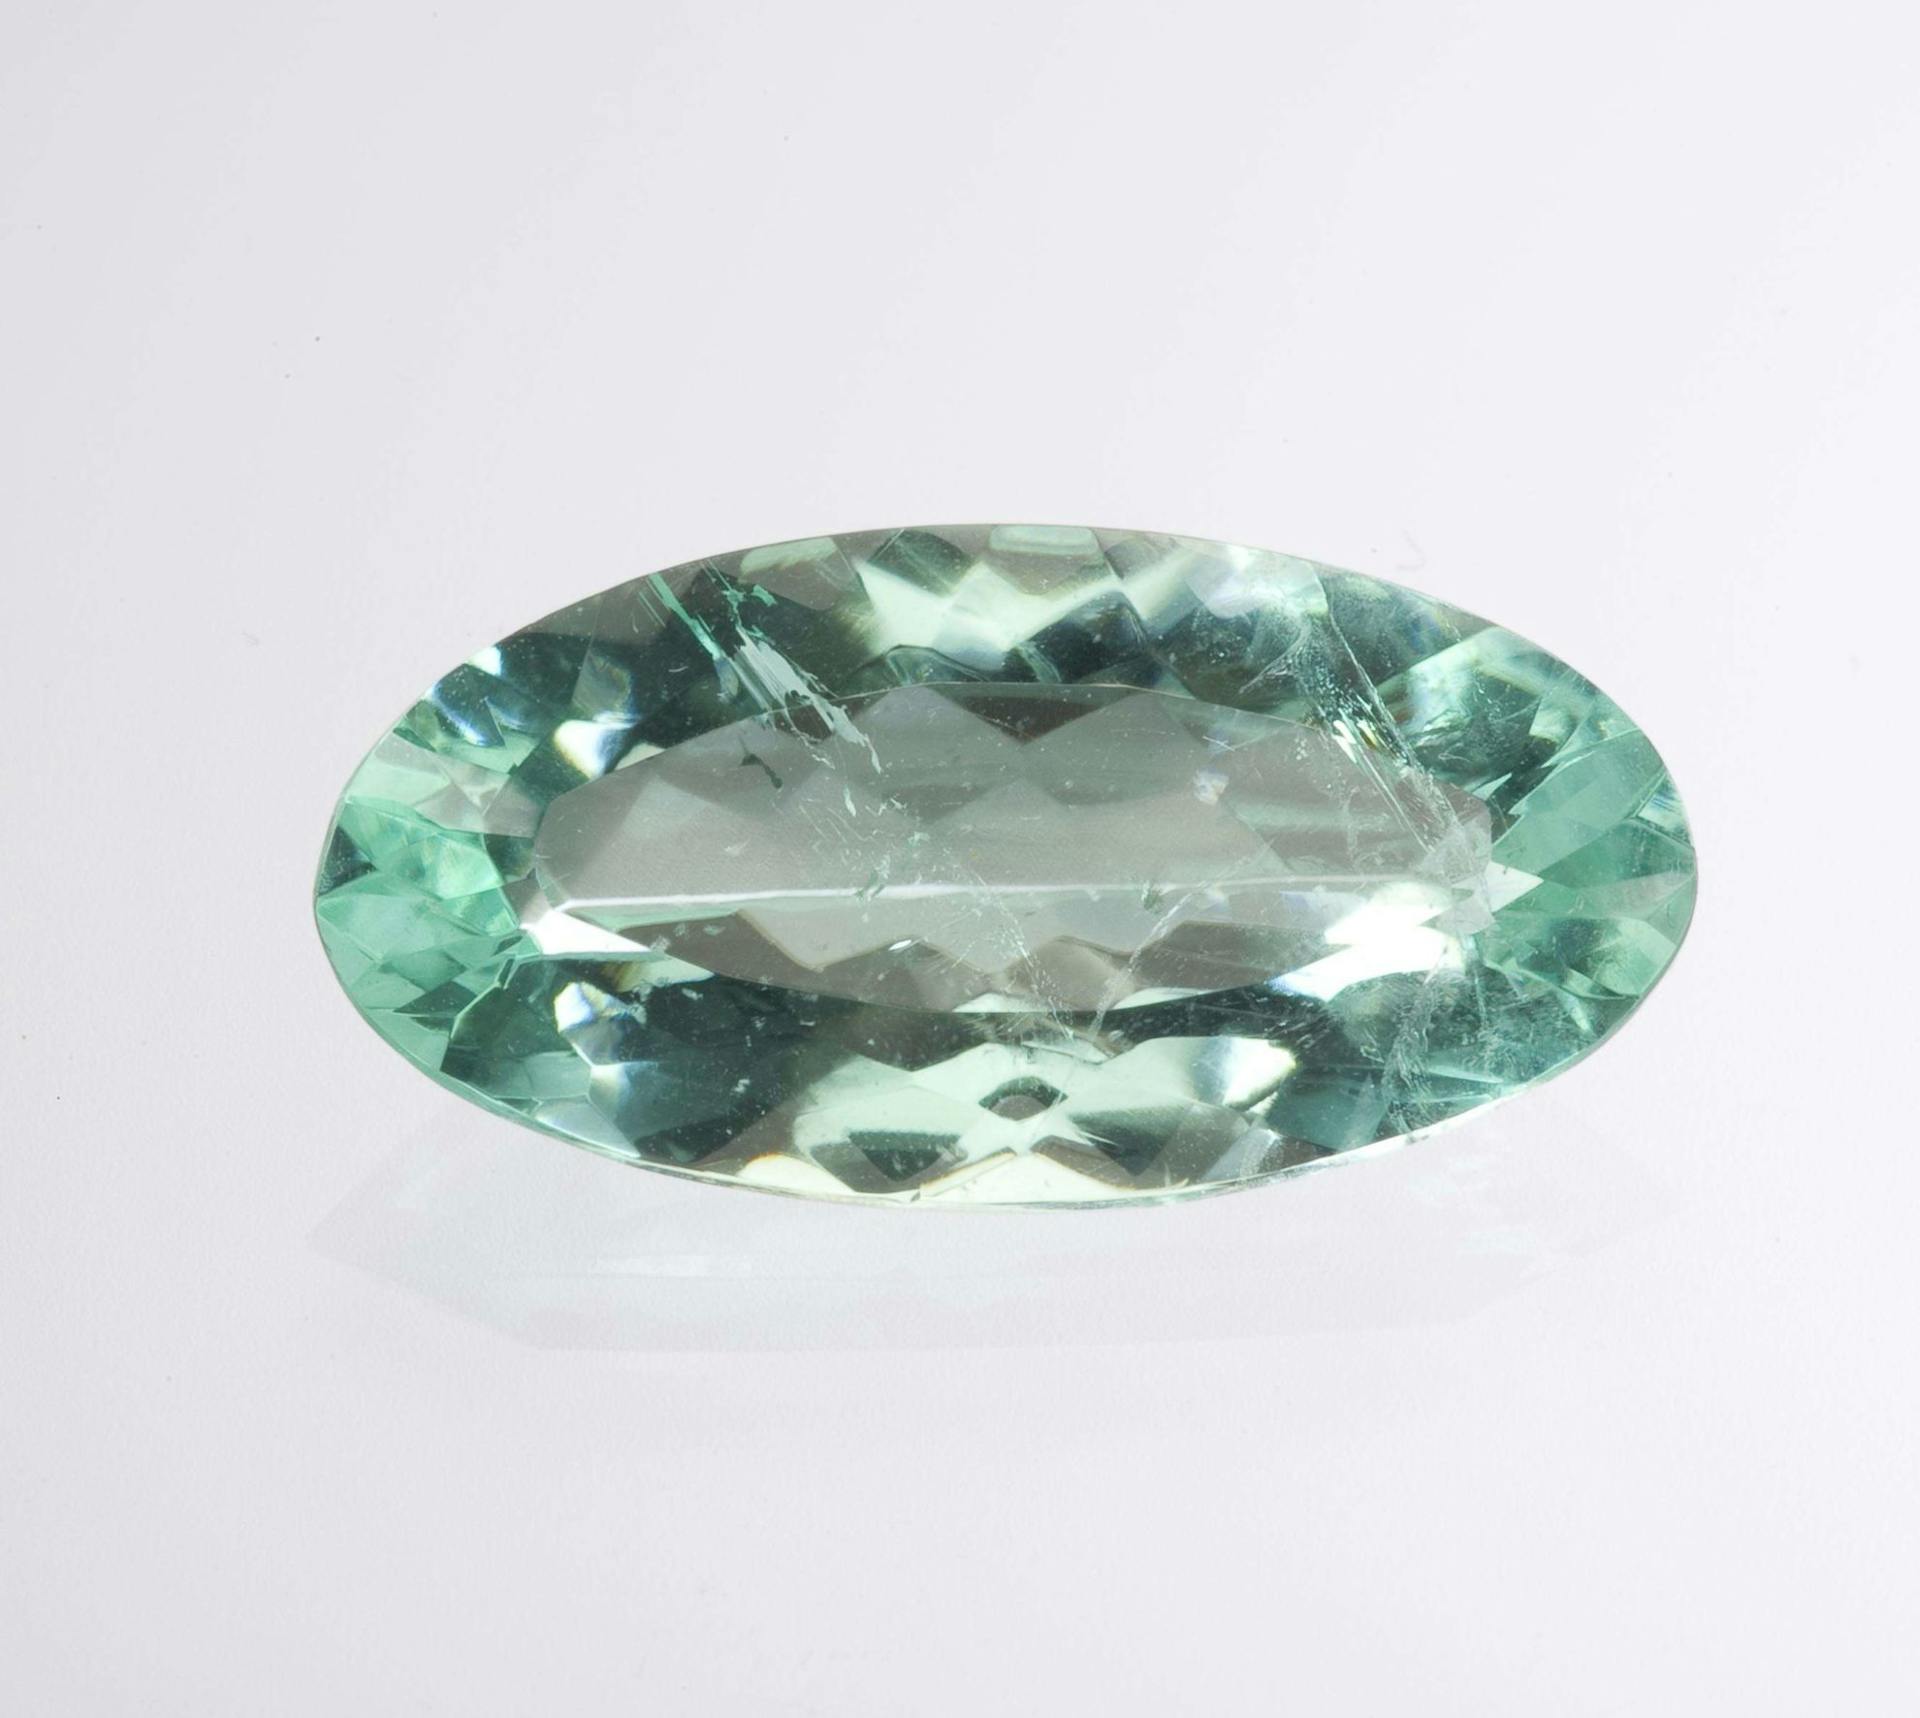 Phosphophyllite Value, Price, and Jewelry Information